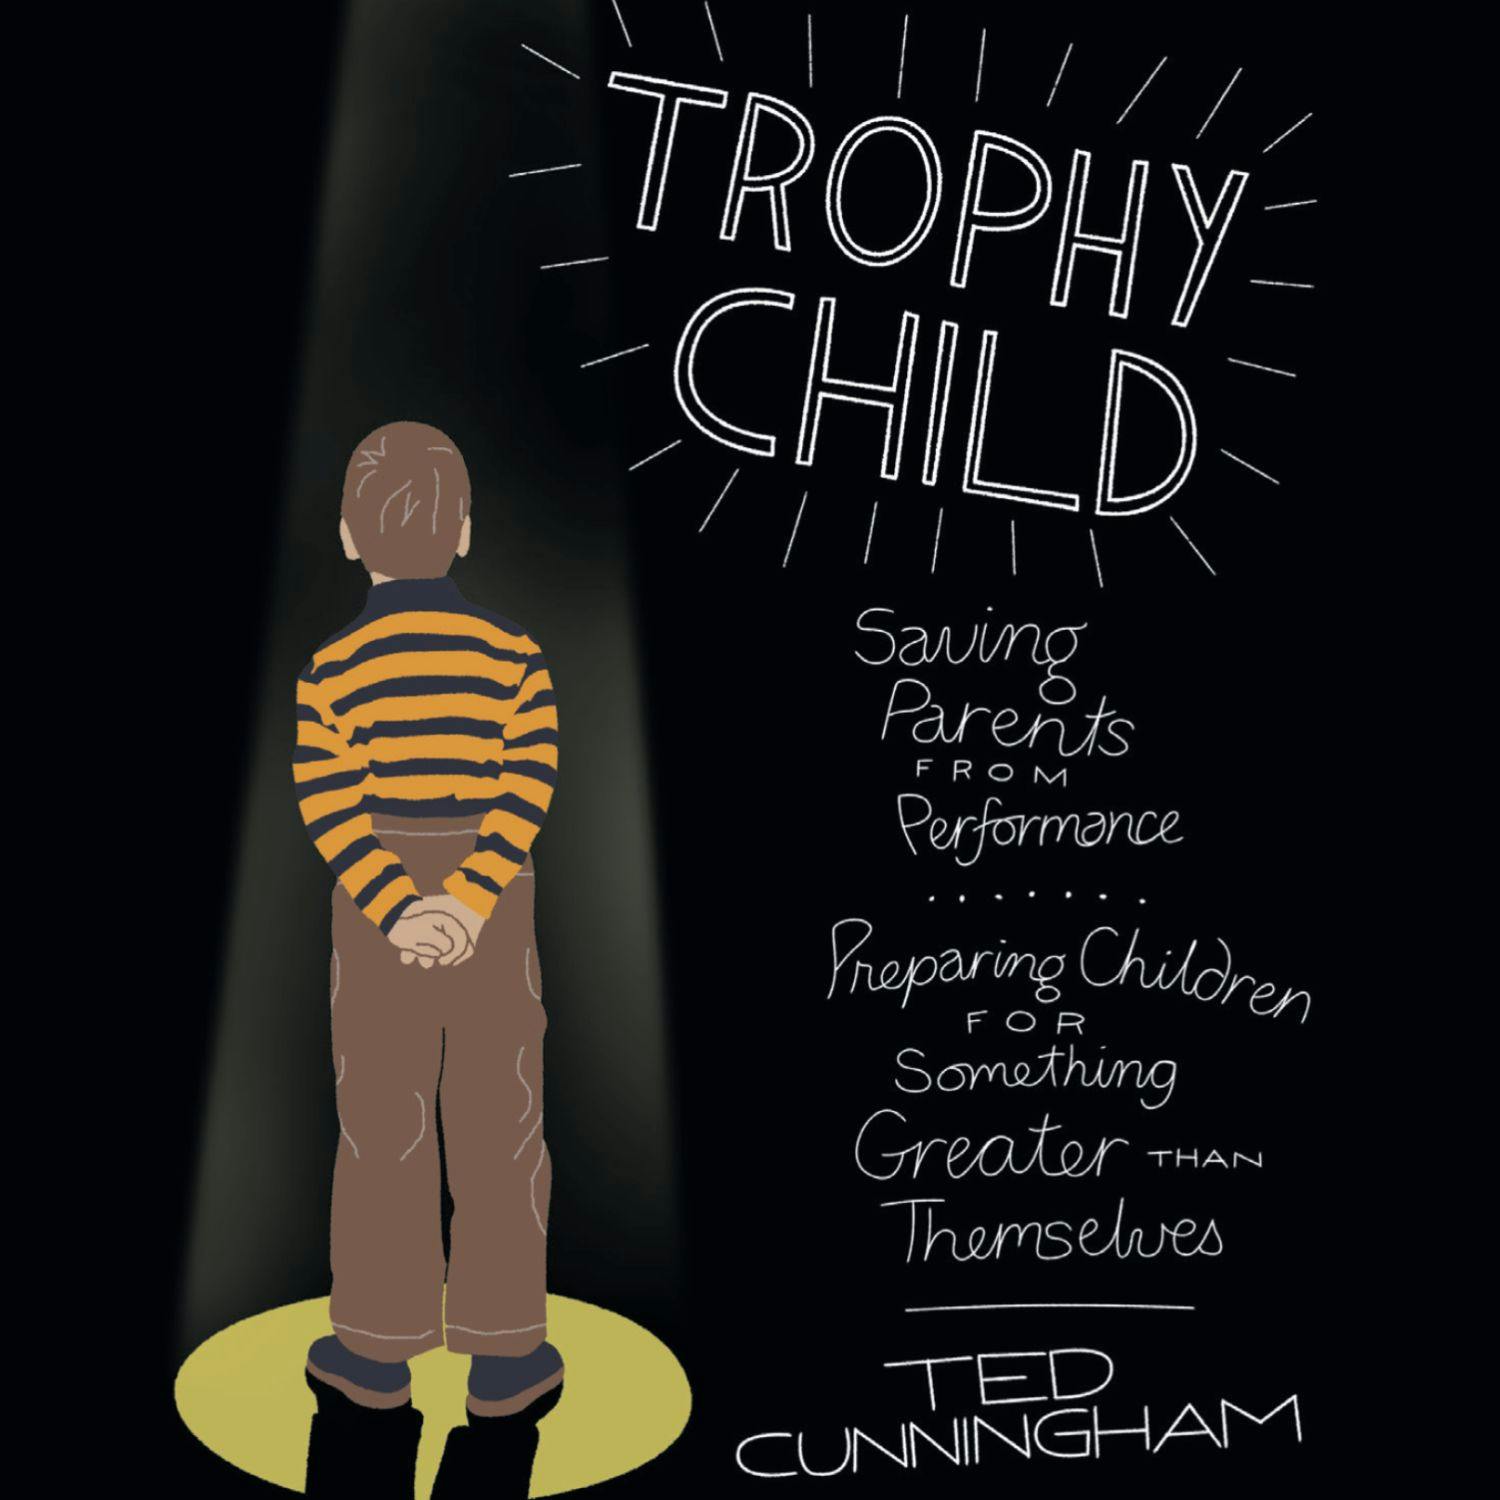 Trophy Child: Saving Parents from Performance, Preparing Children for Something Greater Than Themselves - undefined